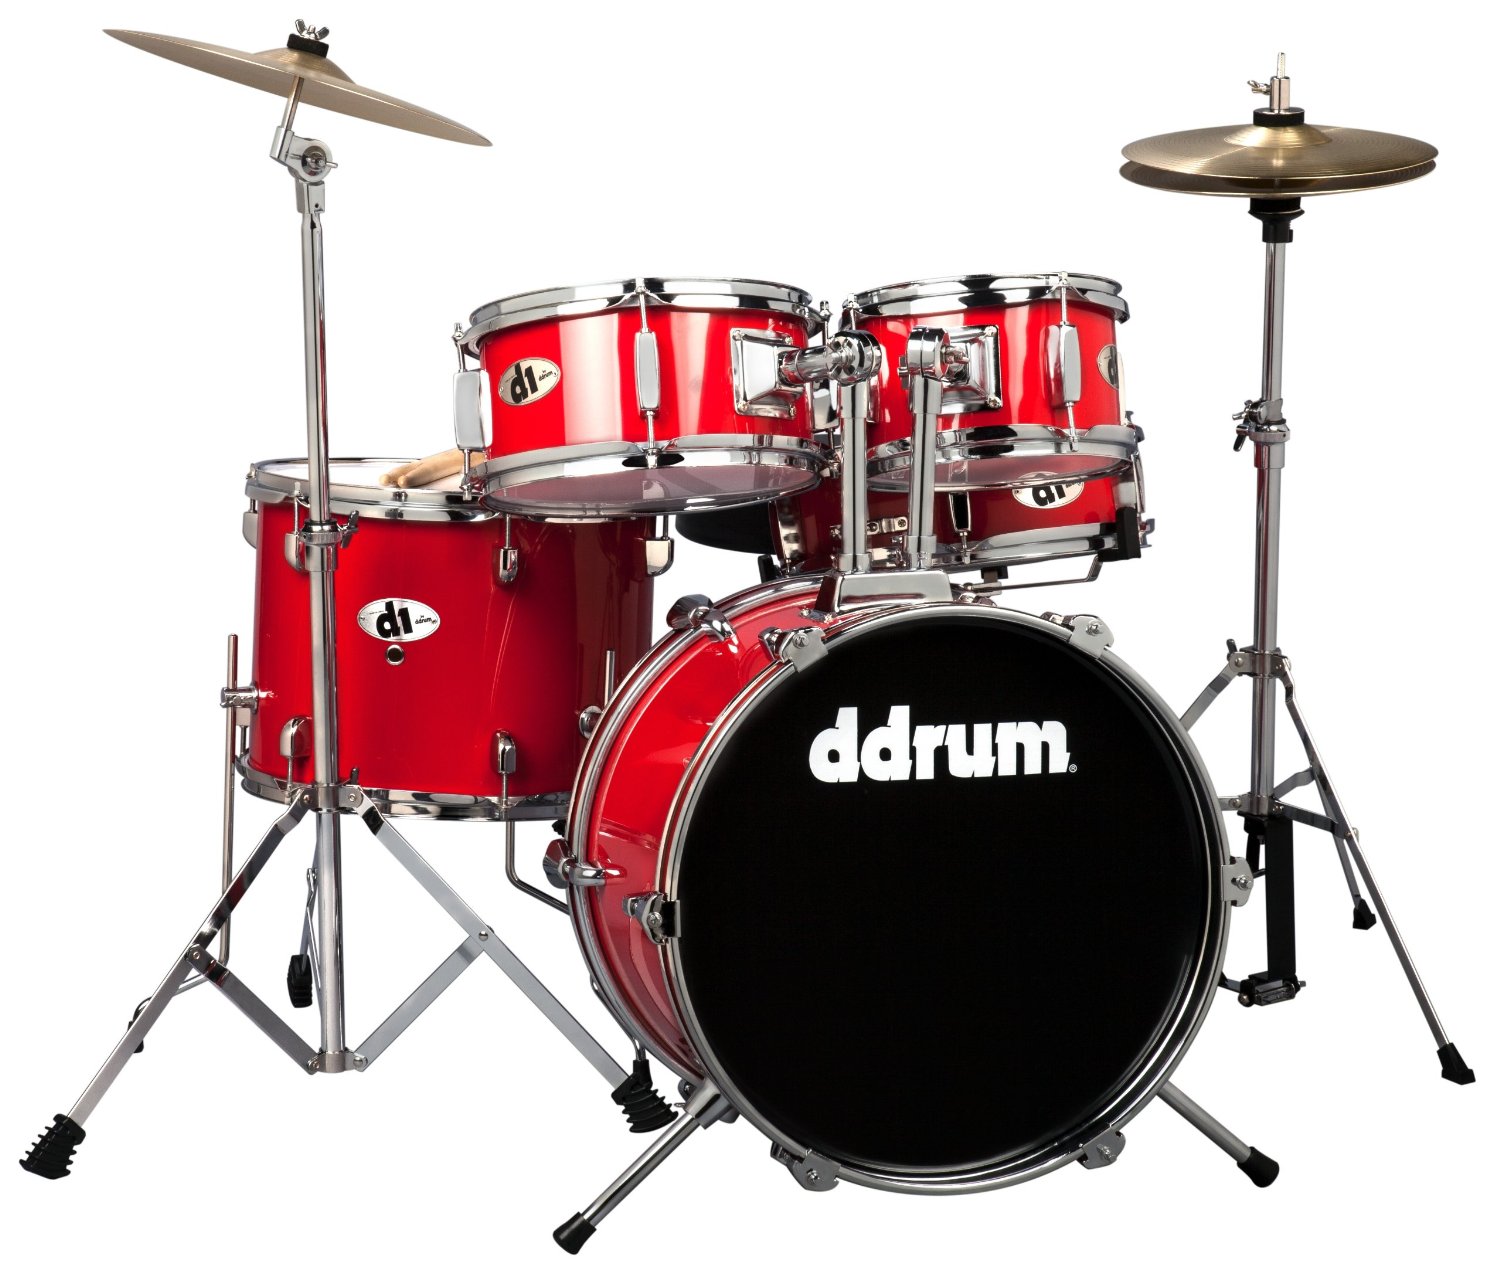 Ddrum D1 Junior Drum Set Crd Candy Red W The Visual